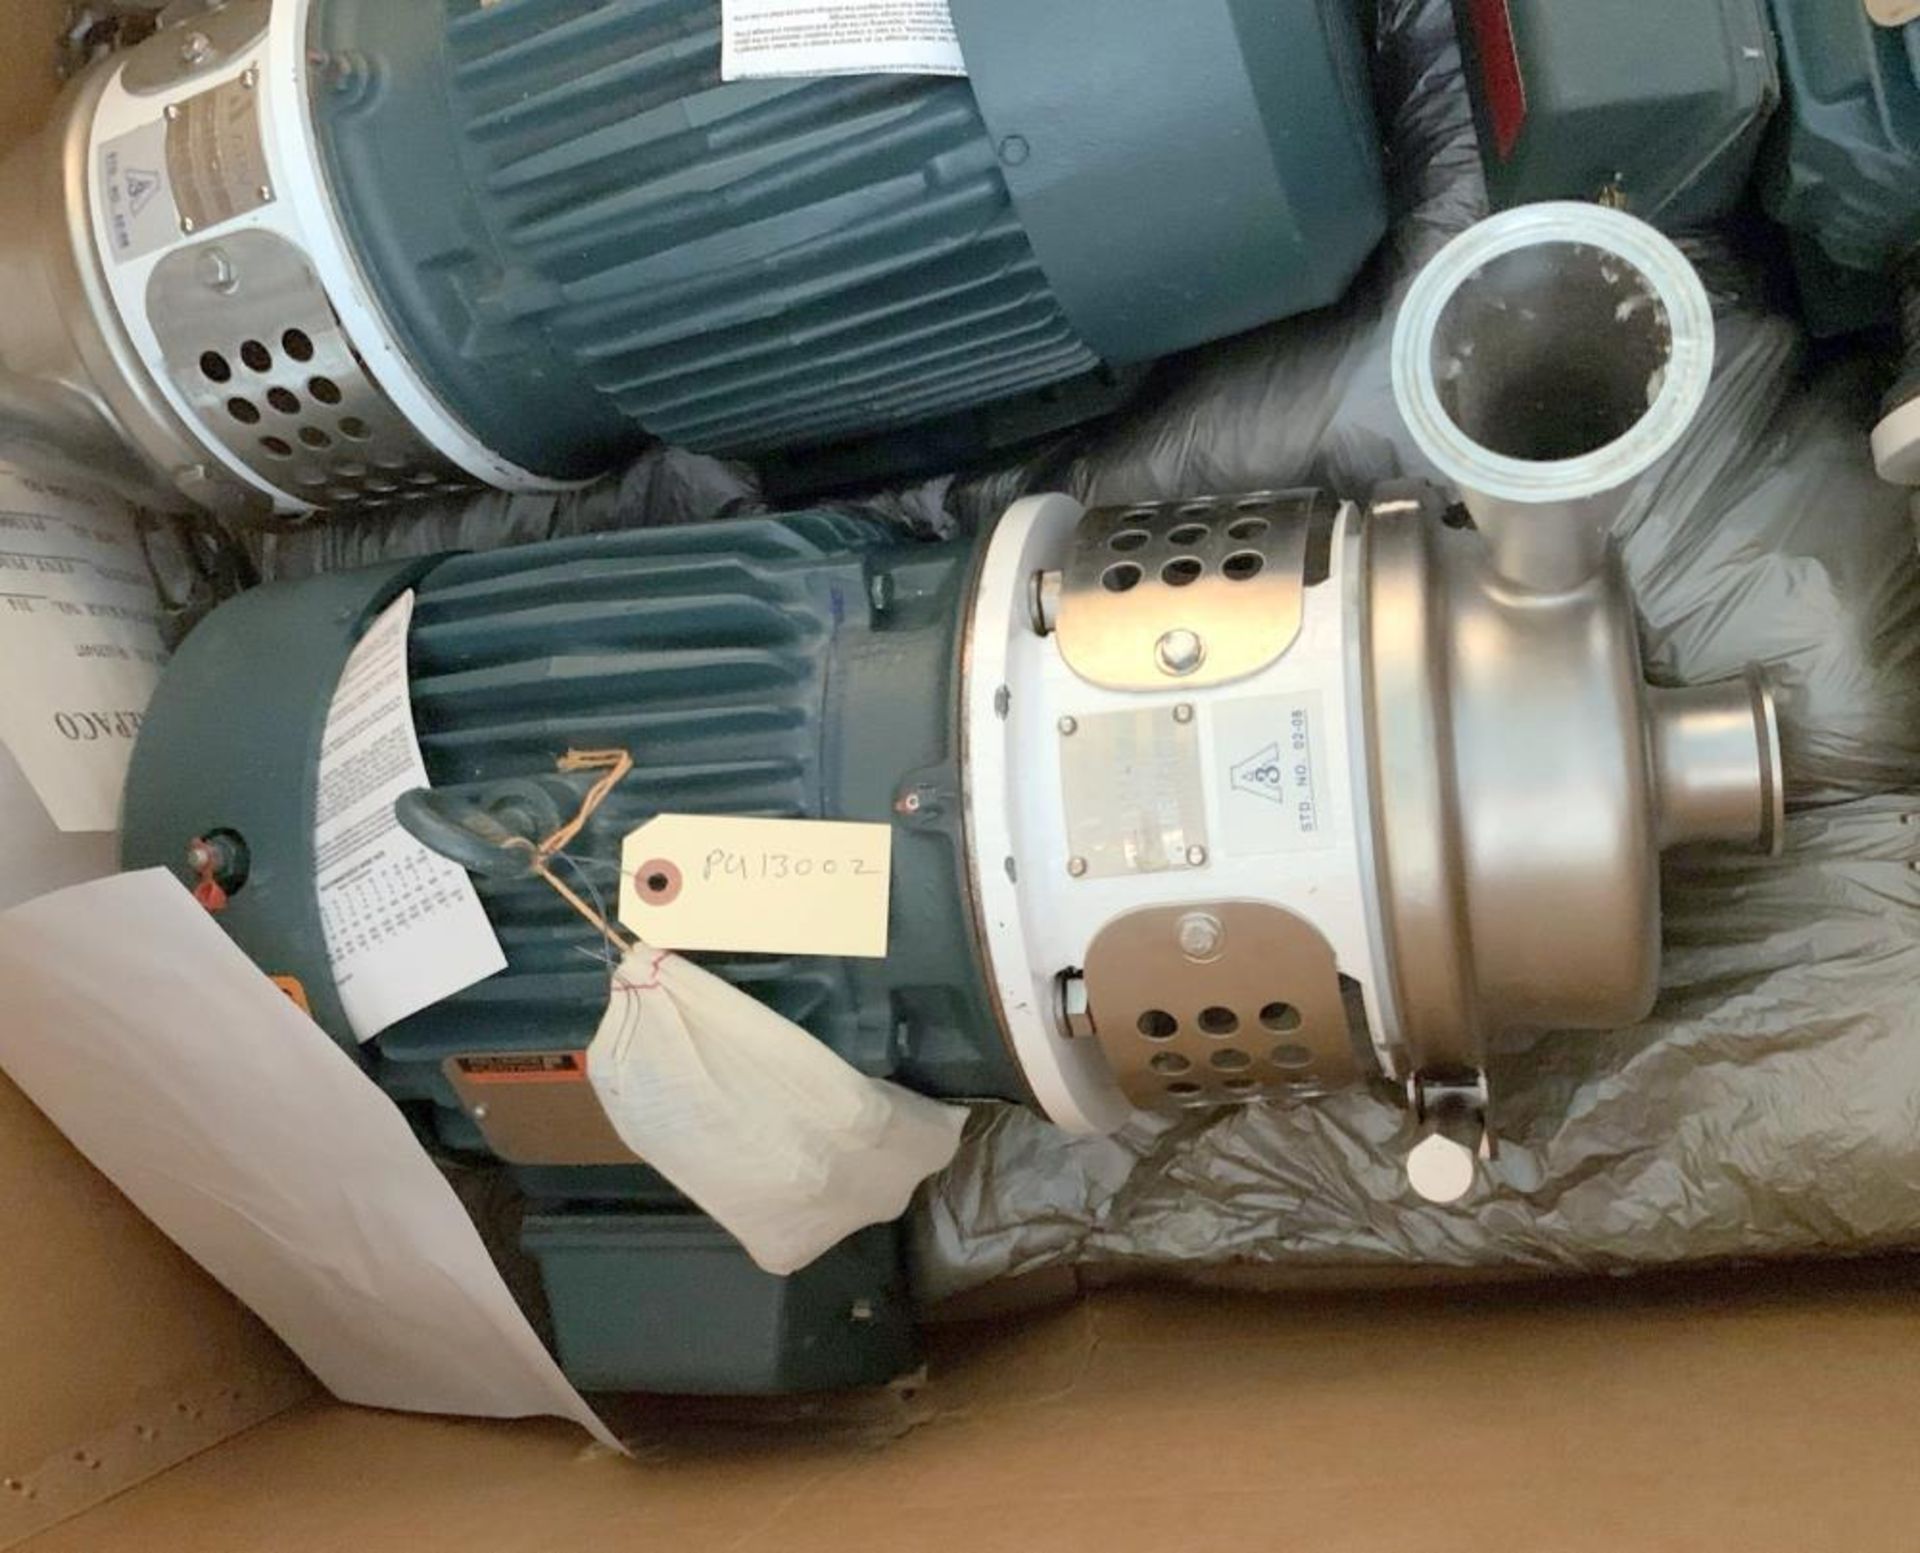 Unused- APV Crepaco Centrifugal Pump, Stainless Steel, Model W20/20. Approximate 105 gallons per min - Image 2 of 6